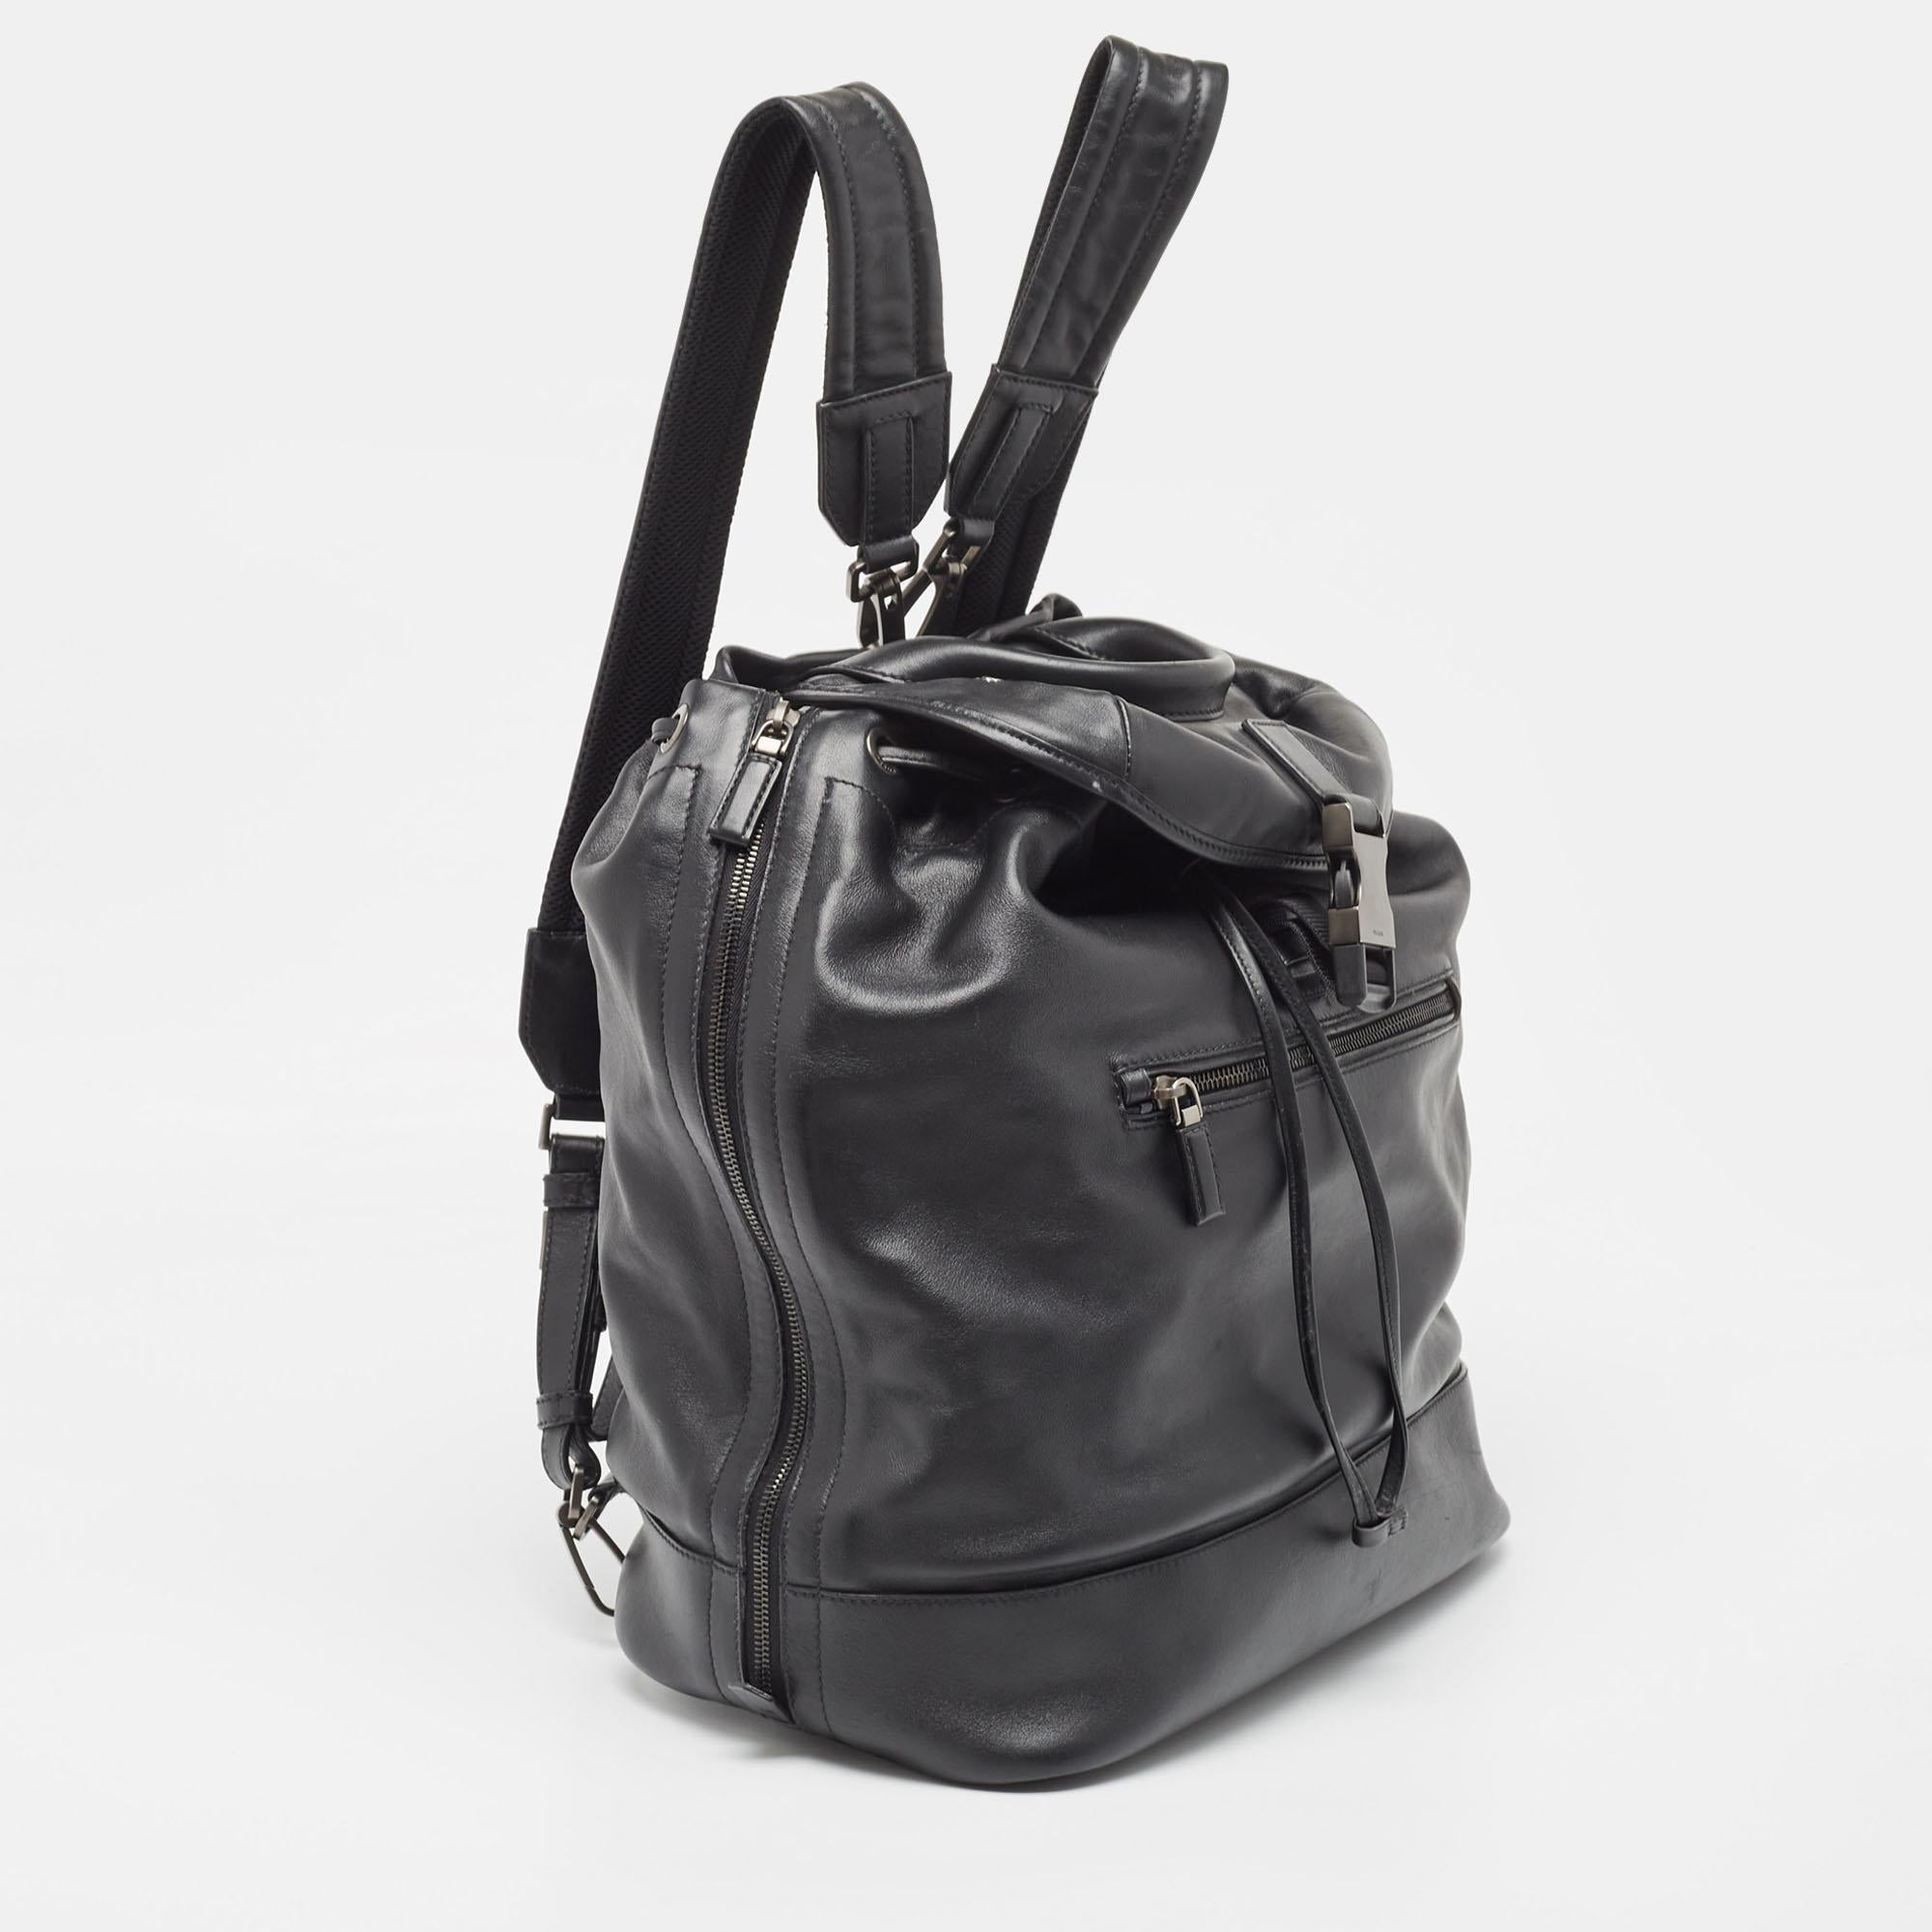 Marked by flawless craftsmanship and enduring appeal, this Prada black backpack for men is bound to be a versatile and durable accessory. It has a practical size.

